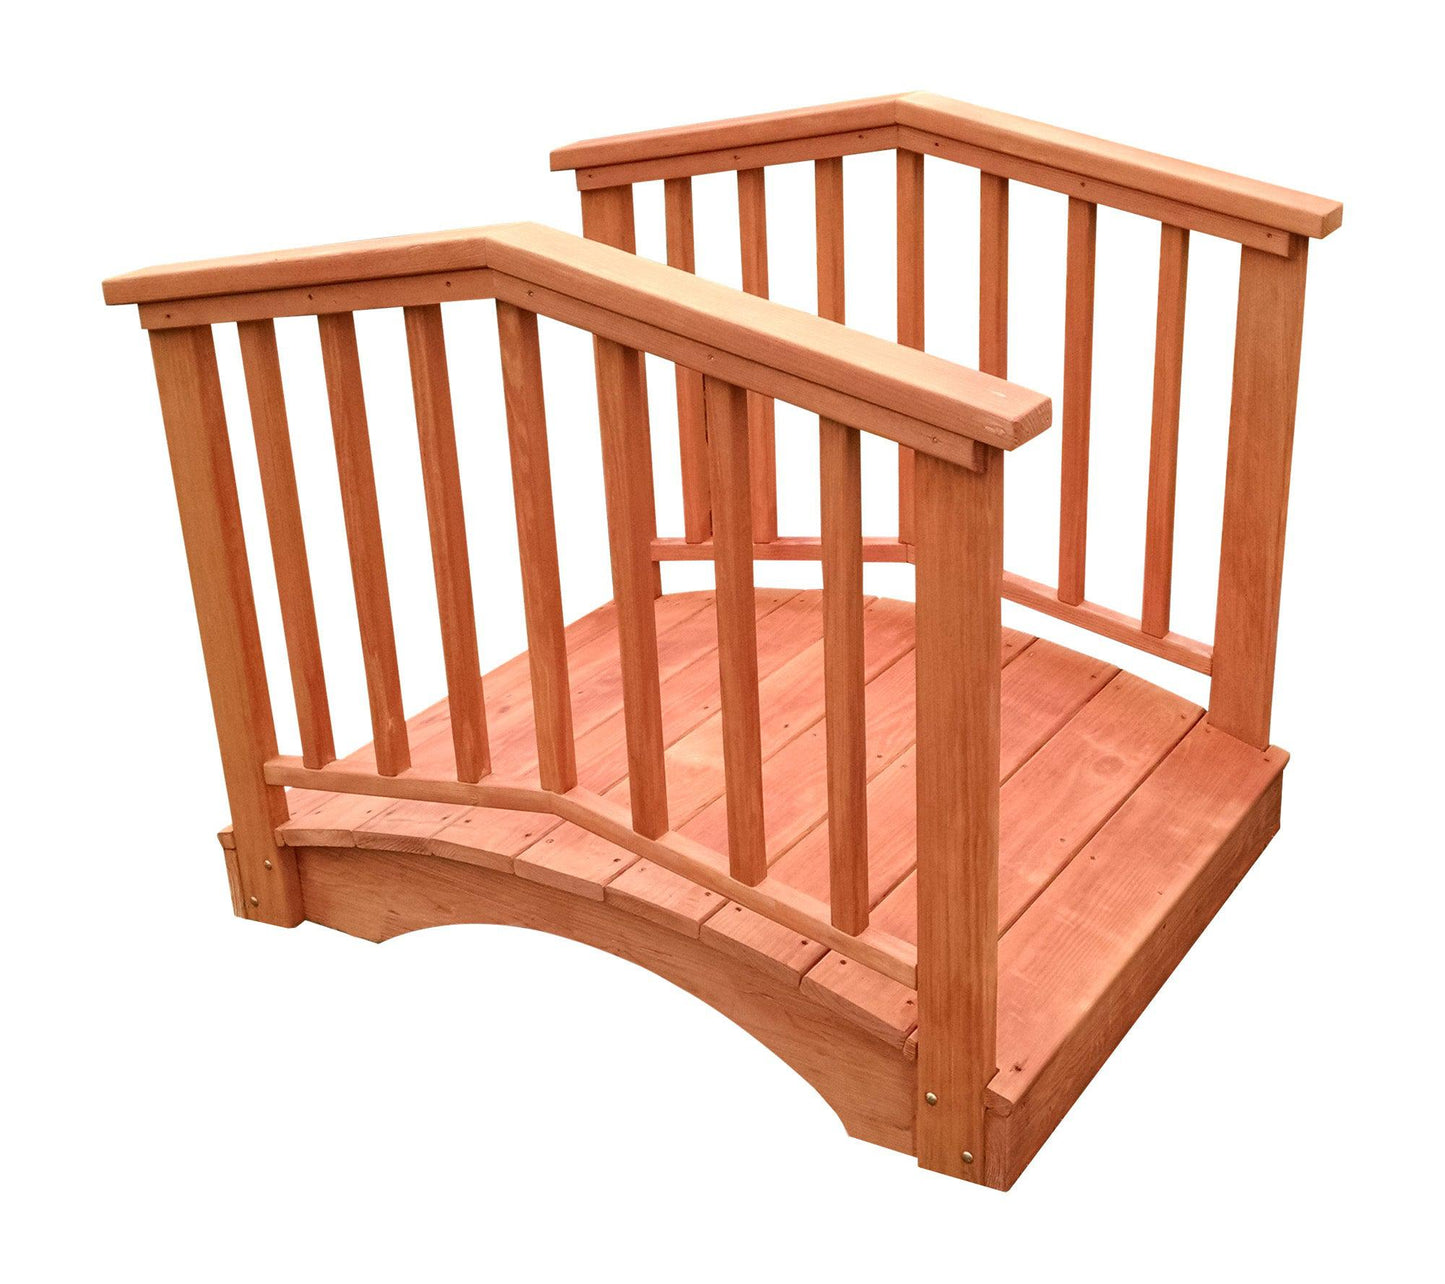 A&L Furniture Co. Western Red Cedar 3' X 4' Baluster Bridge - LEAD TIME TO SHIP 4 WEEKS OR LESS